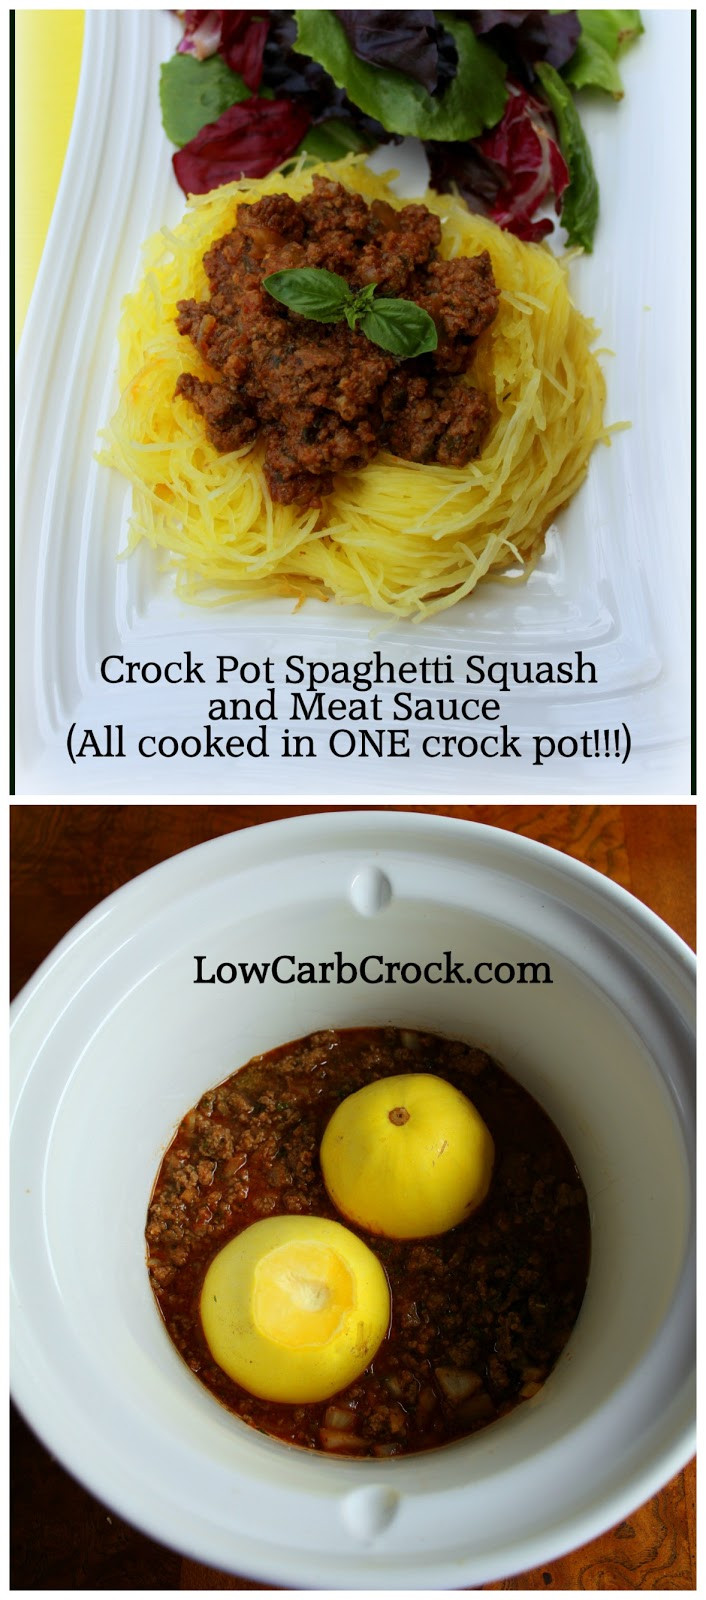 Low Carb Crock Pot Recipes
 Low Carb Crock Pot Meat Sauce and Spaghetti Squash cooked